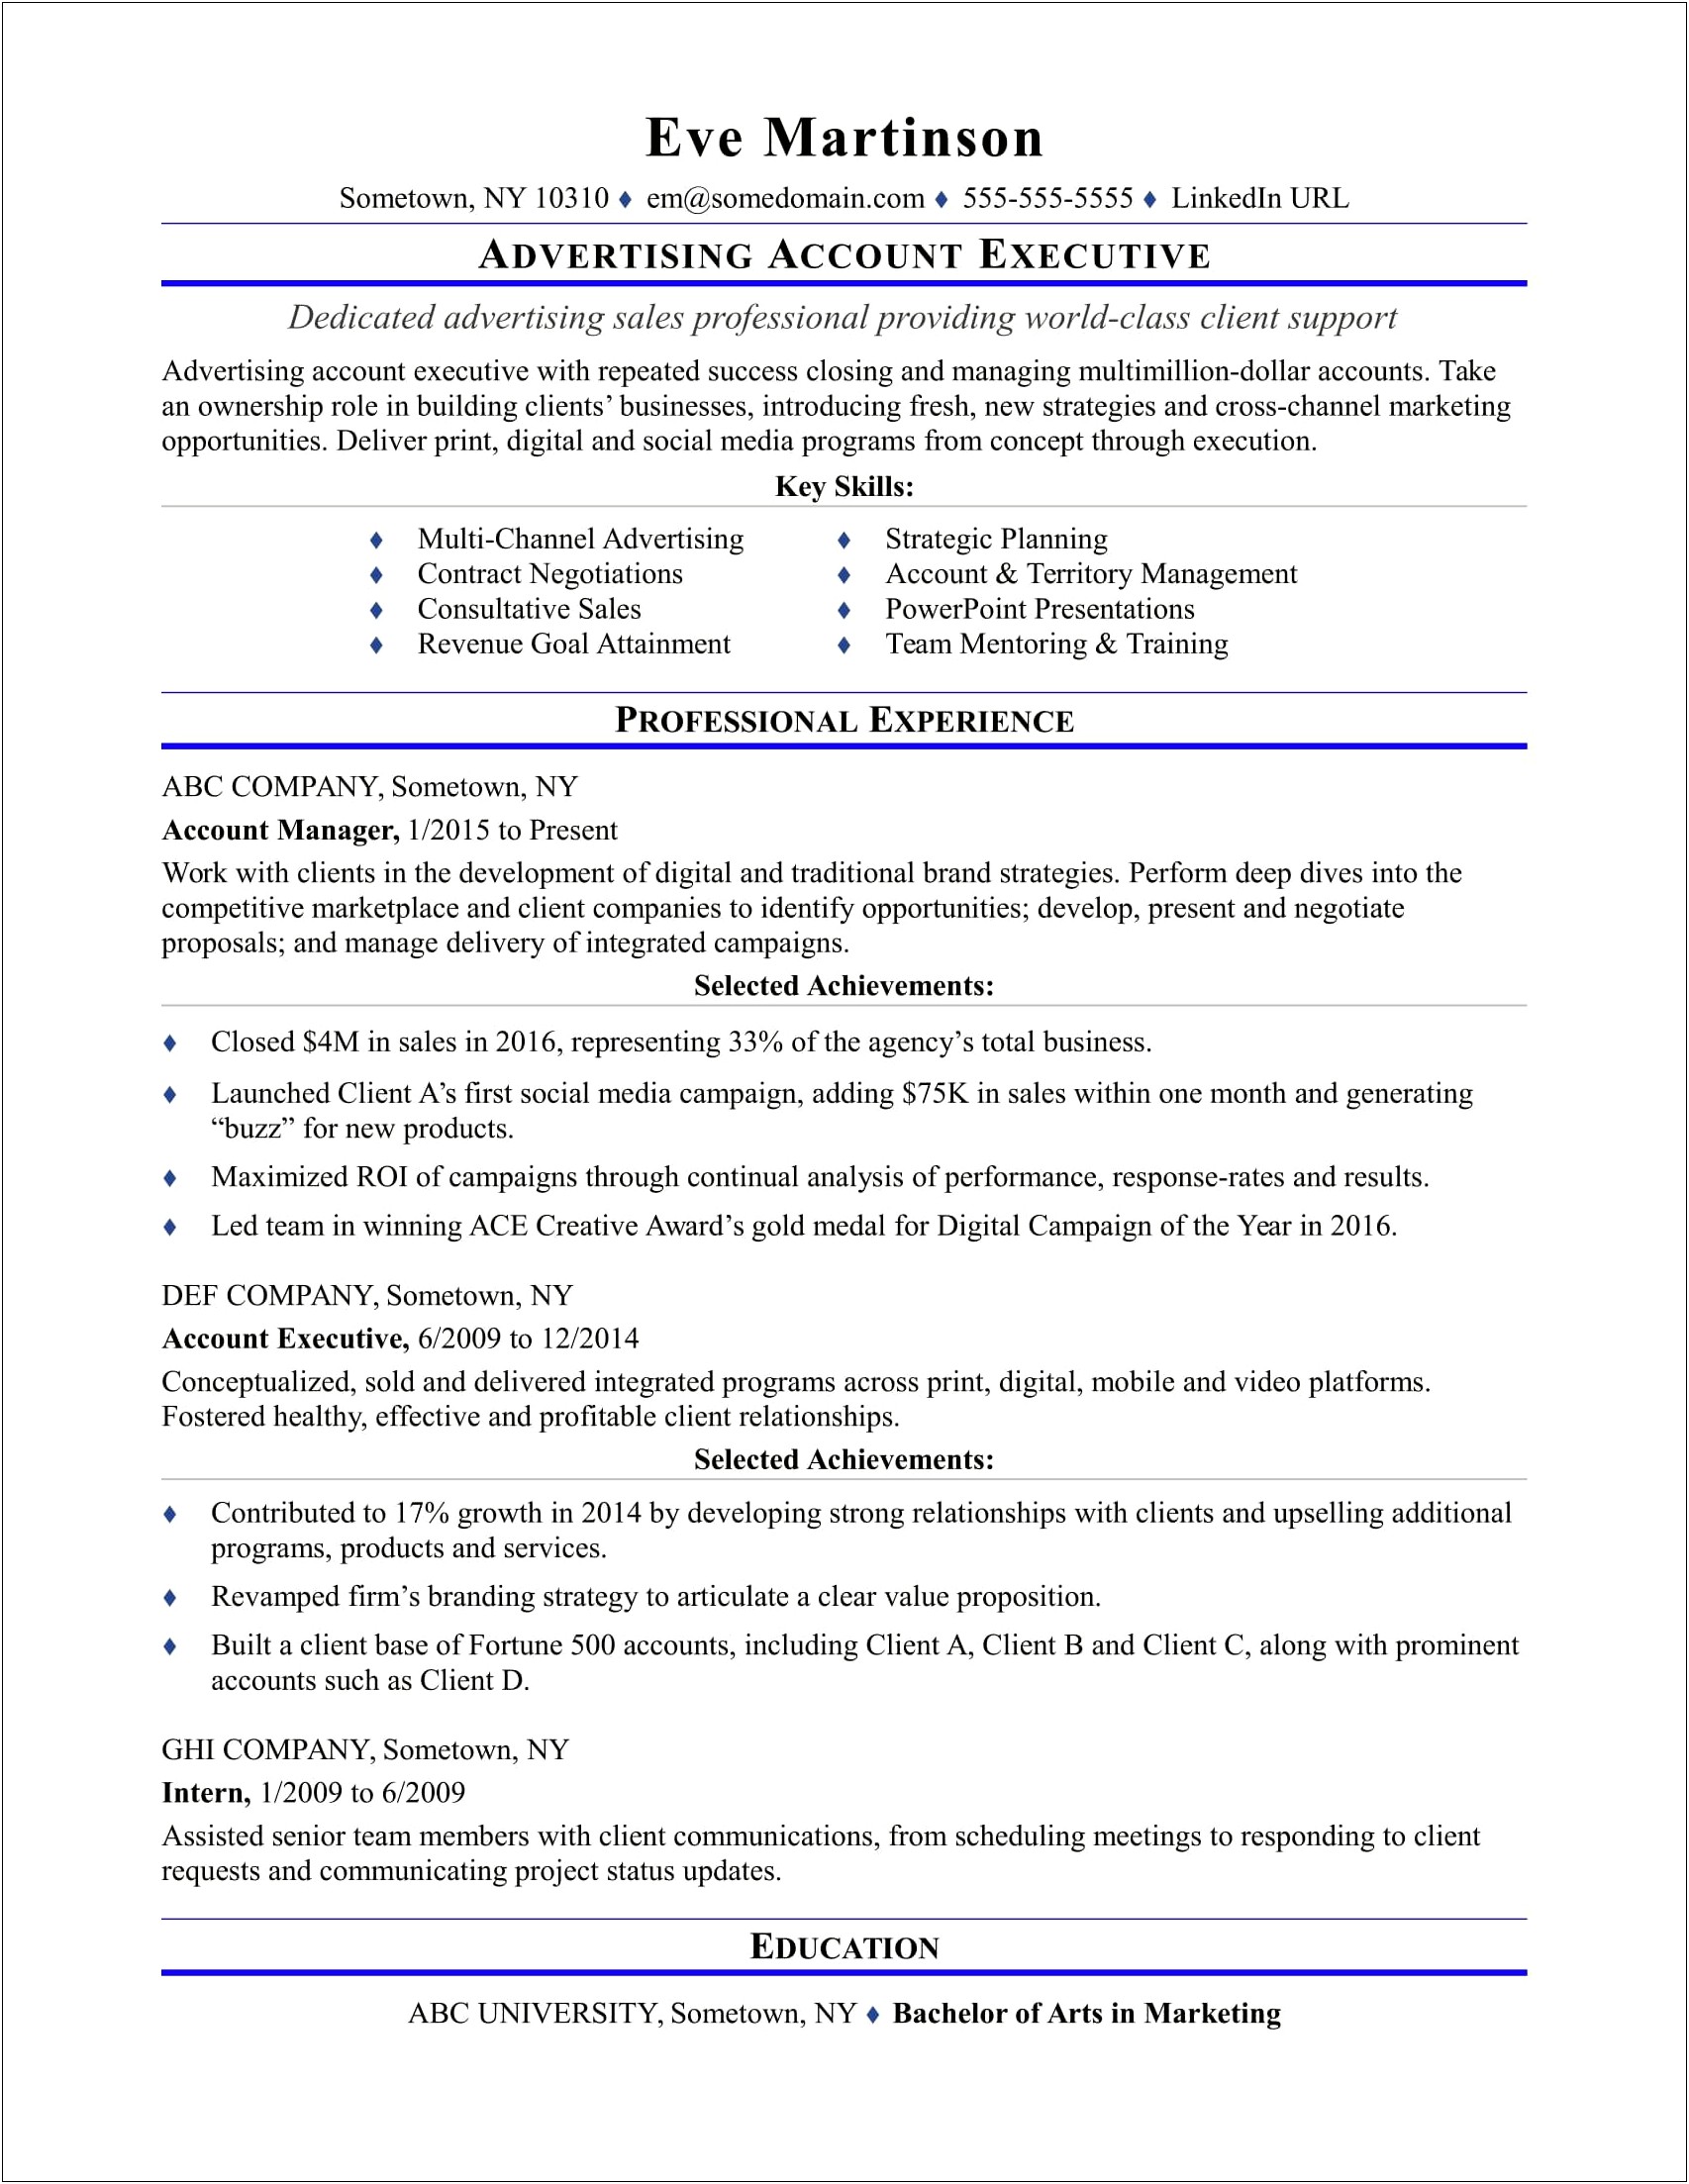 Technical Account Manager Resume Objective